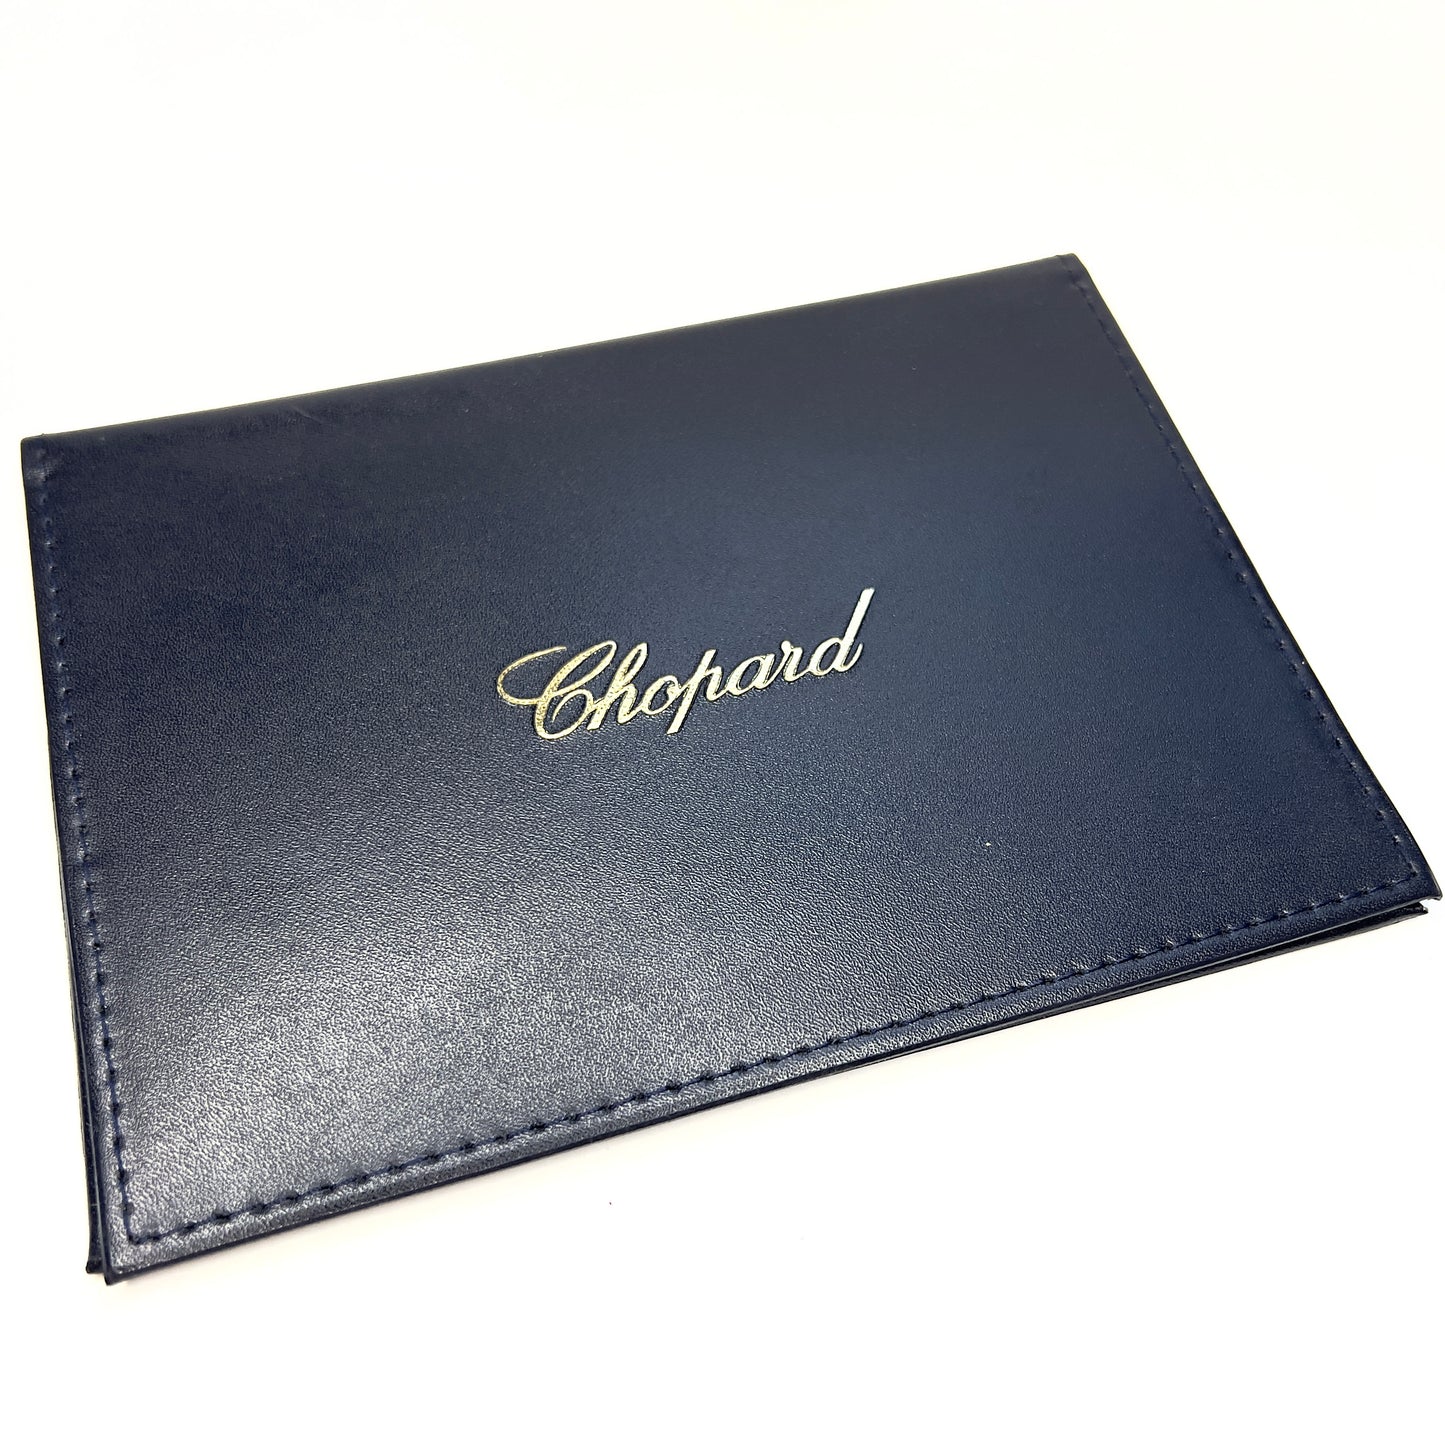 CHOPARD Blue Faux Leather Documents Folder 6.75x5 inches